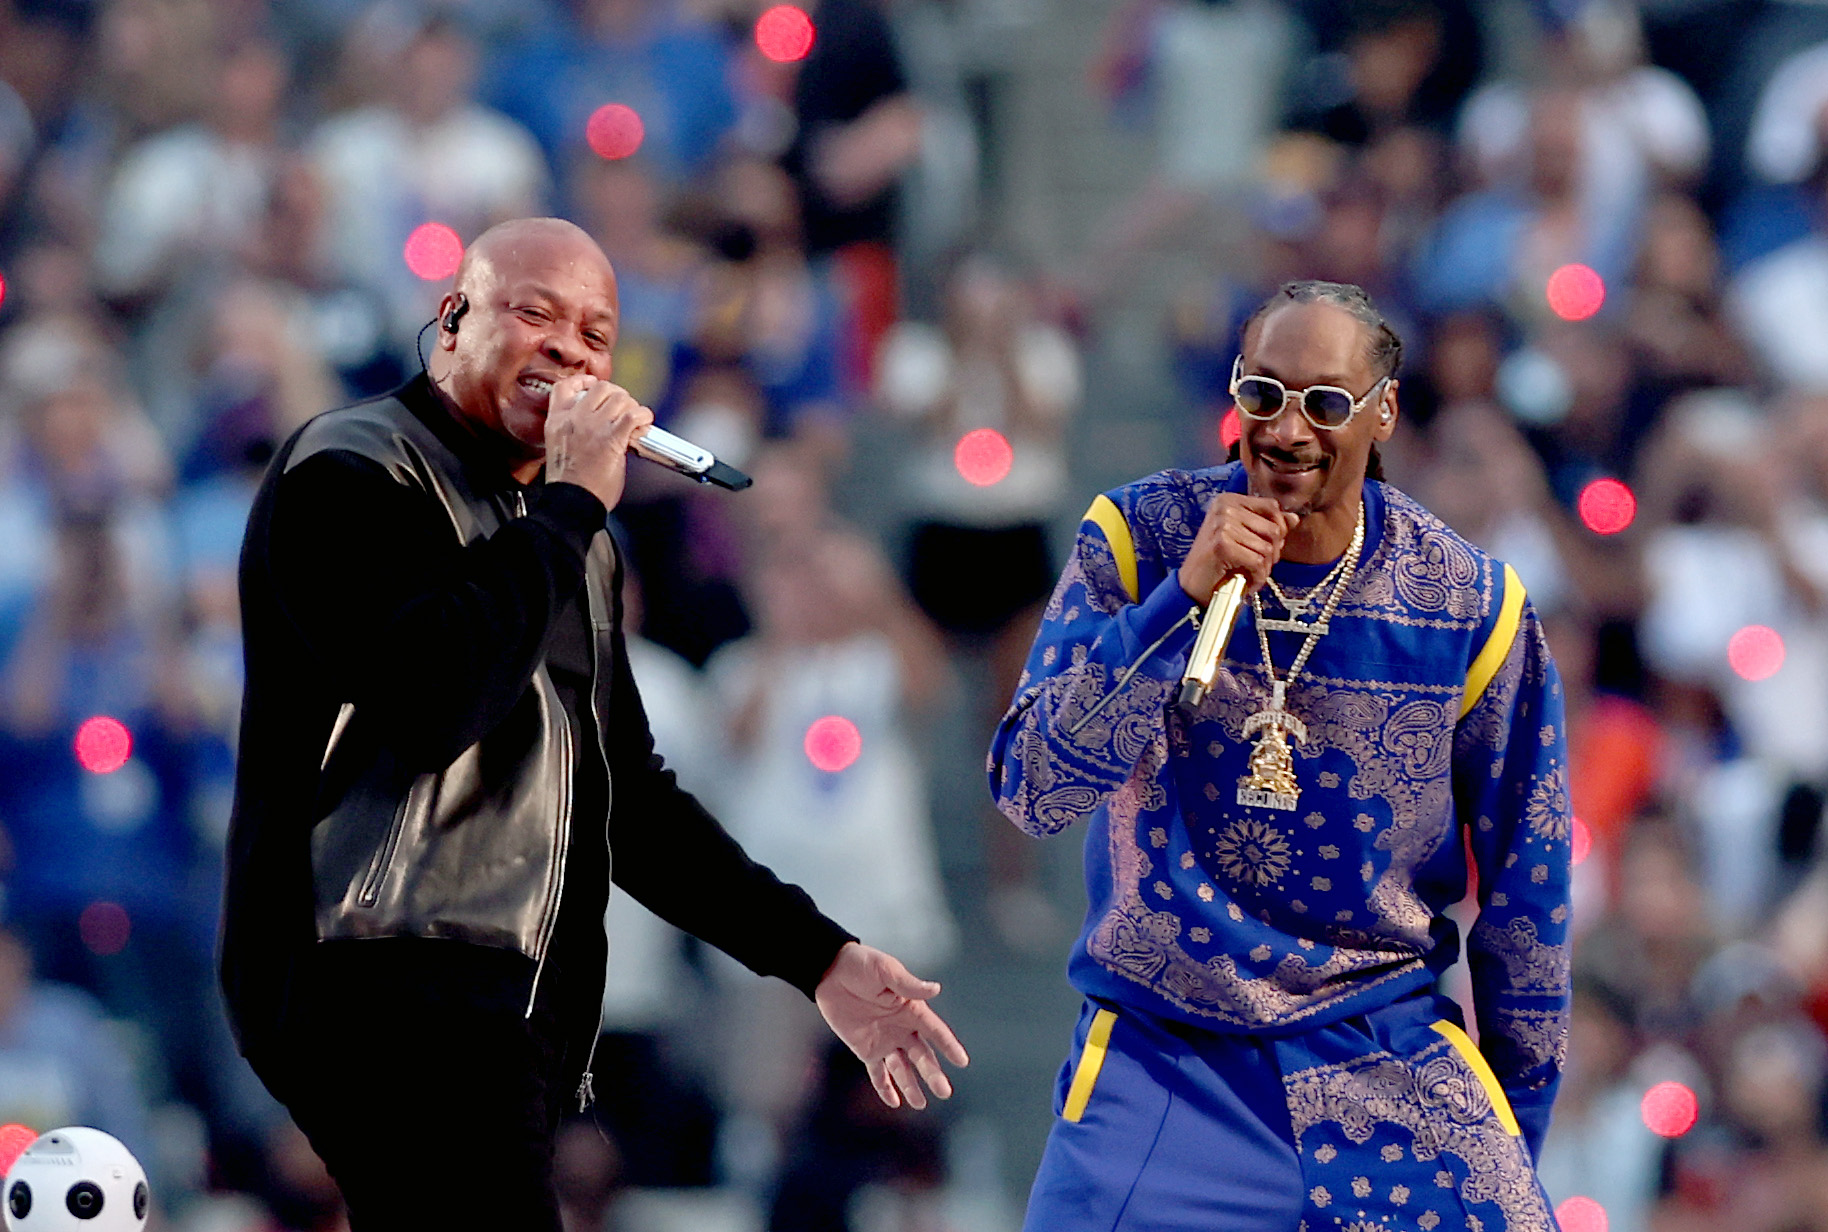 30th anniversary, Snoop Dogg Doggystyle, super bowl, superbowl